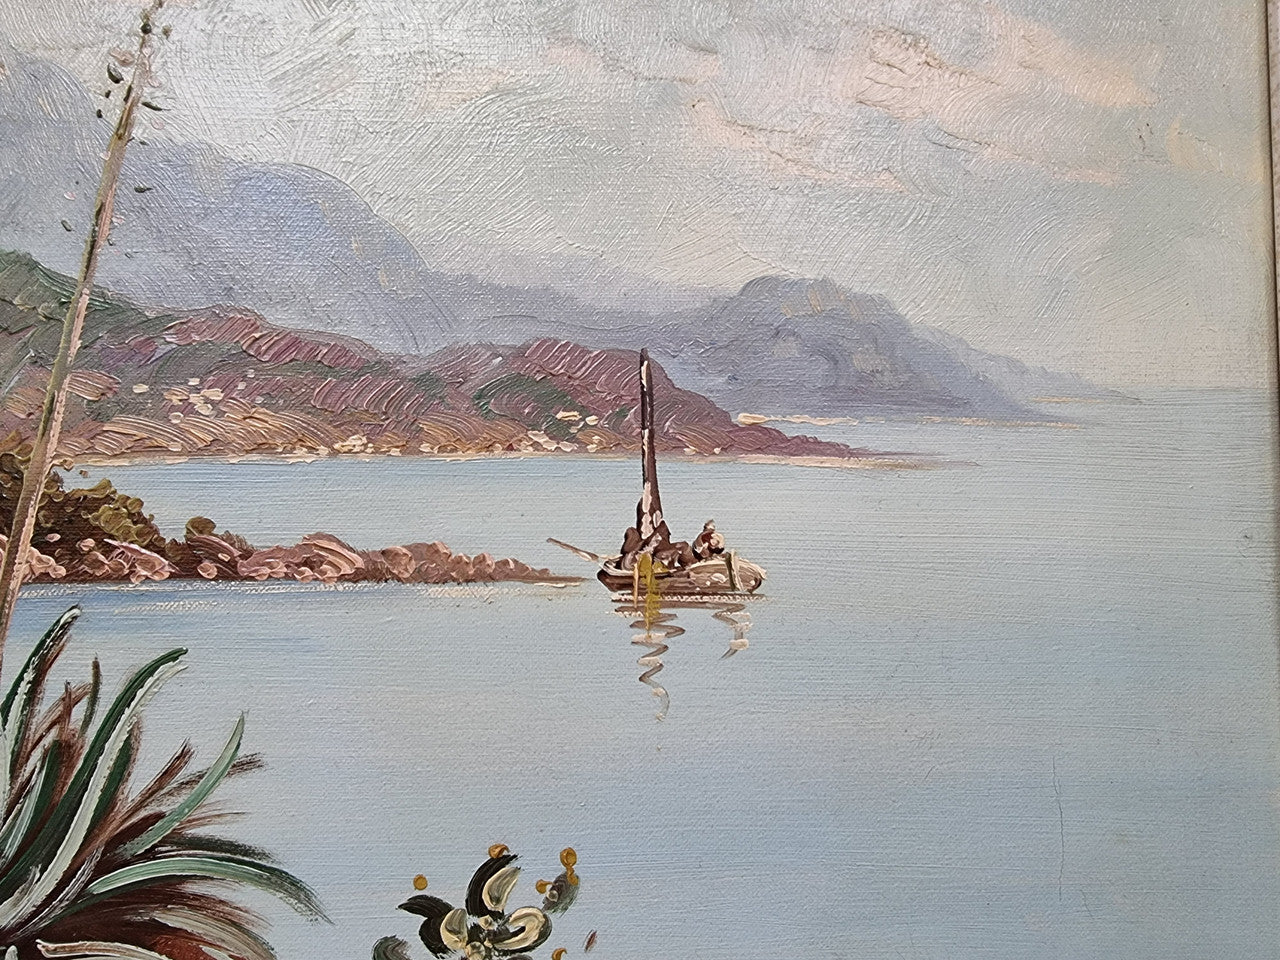 Sourced in France a colorful signed oil on canvas " Mediterranean coastal scene" in a decorative gilt frame. It is in good original detailed condition.